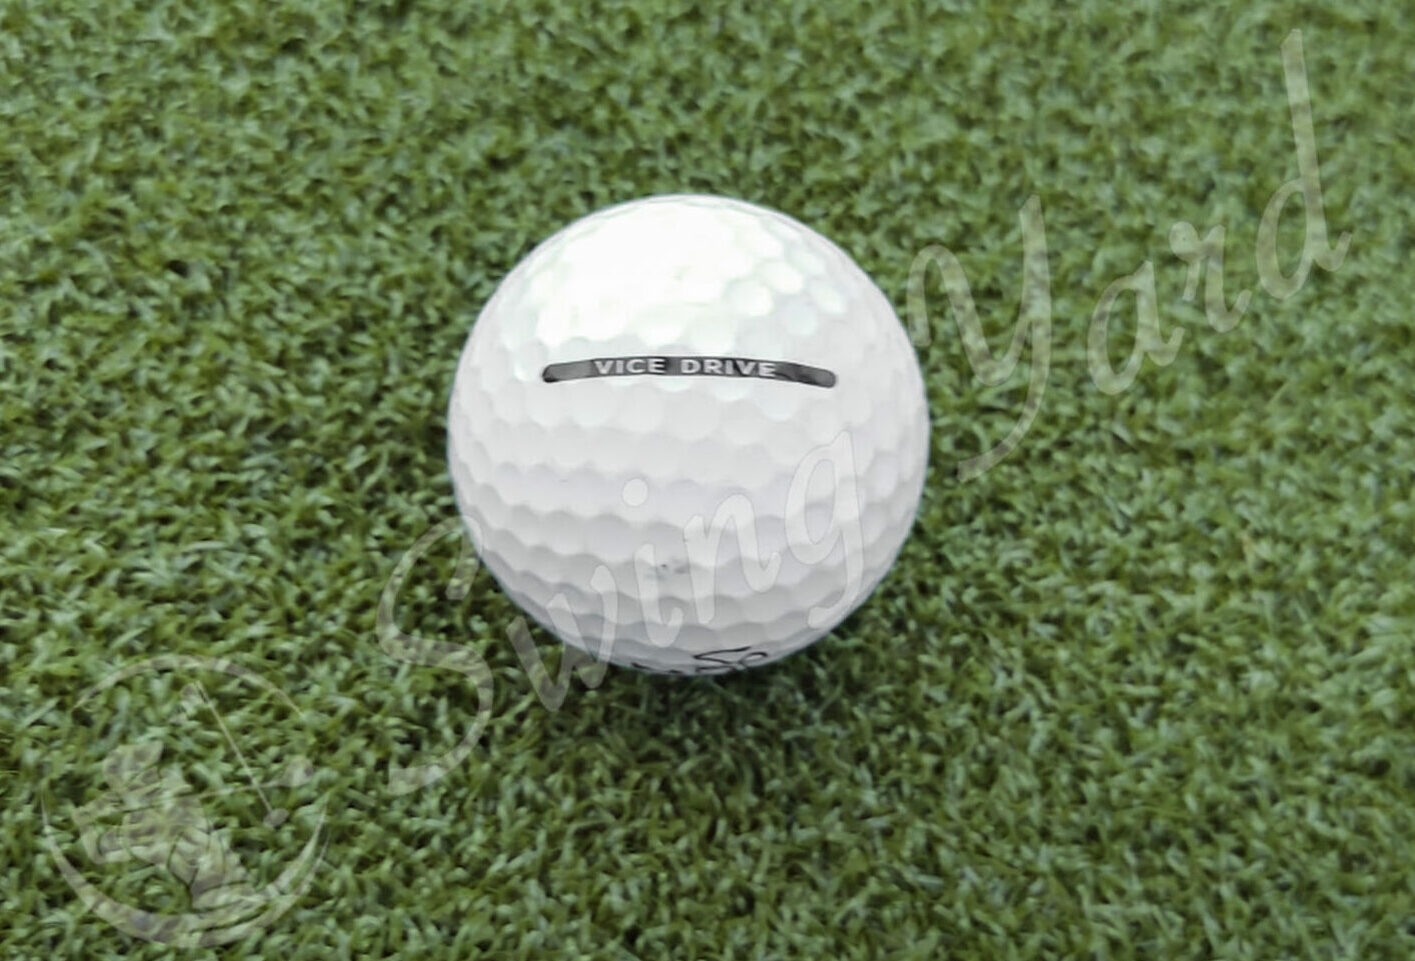 A Vice Drive ball in the grass at the golf course